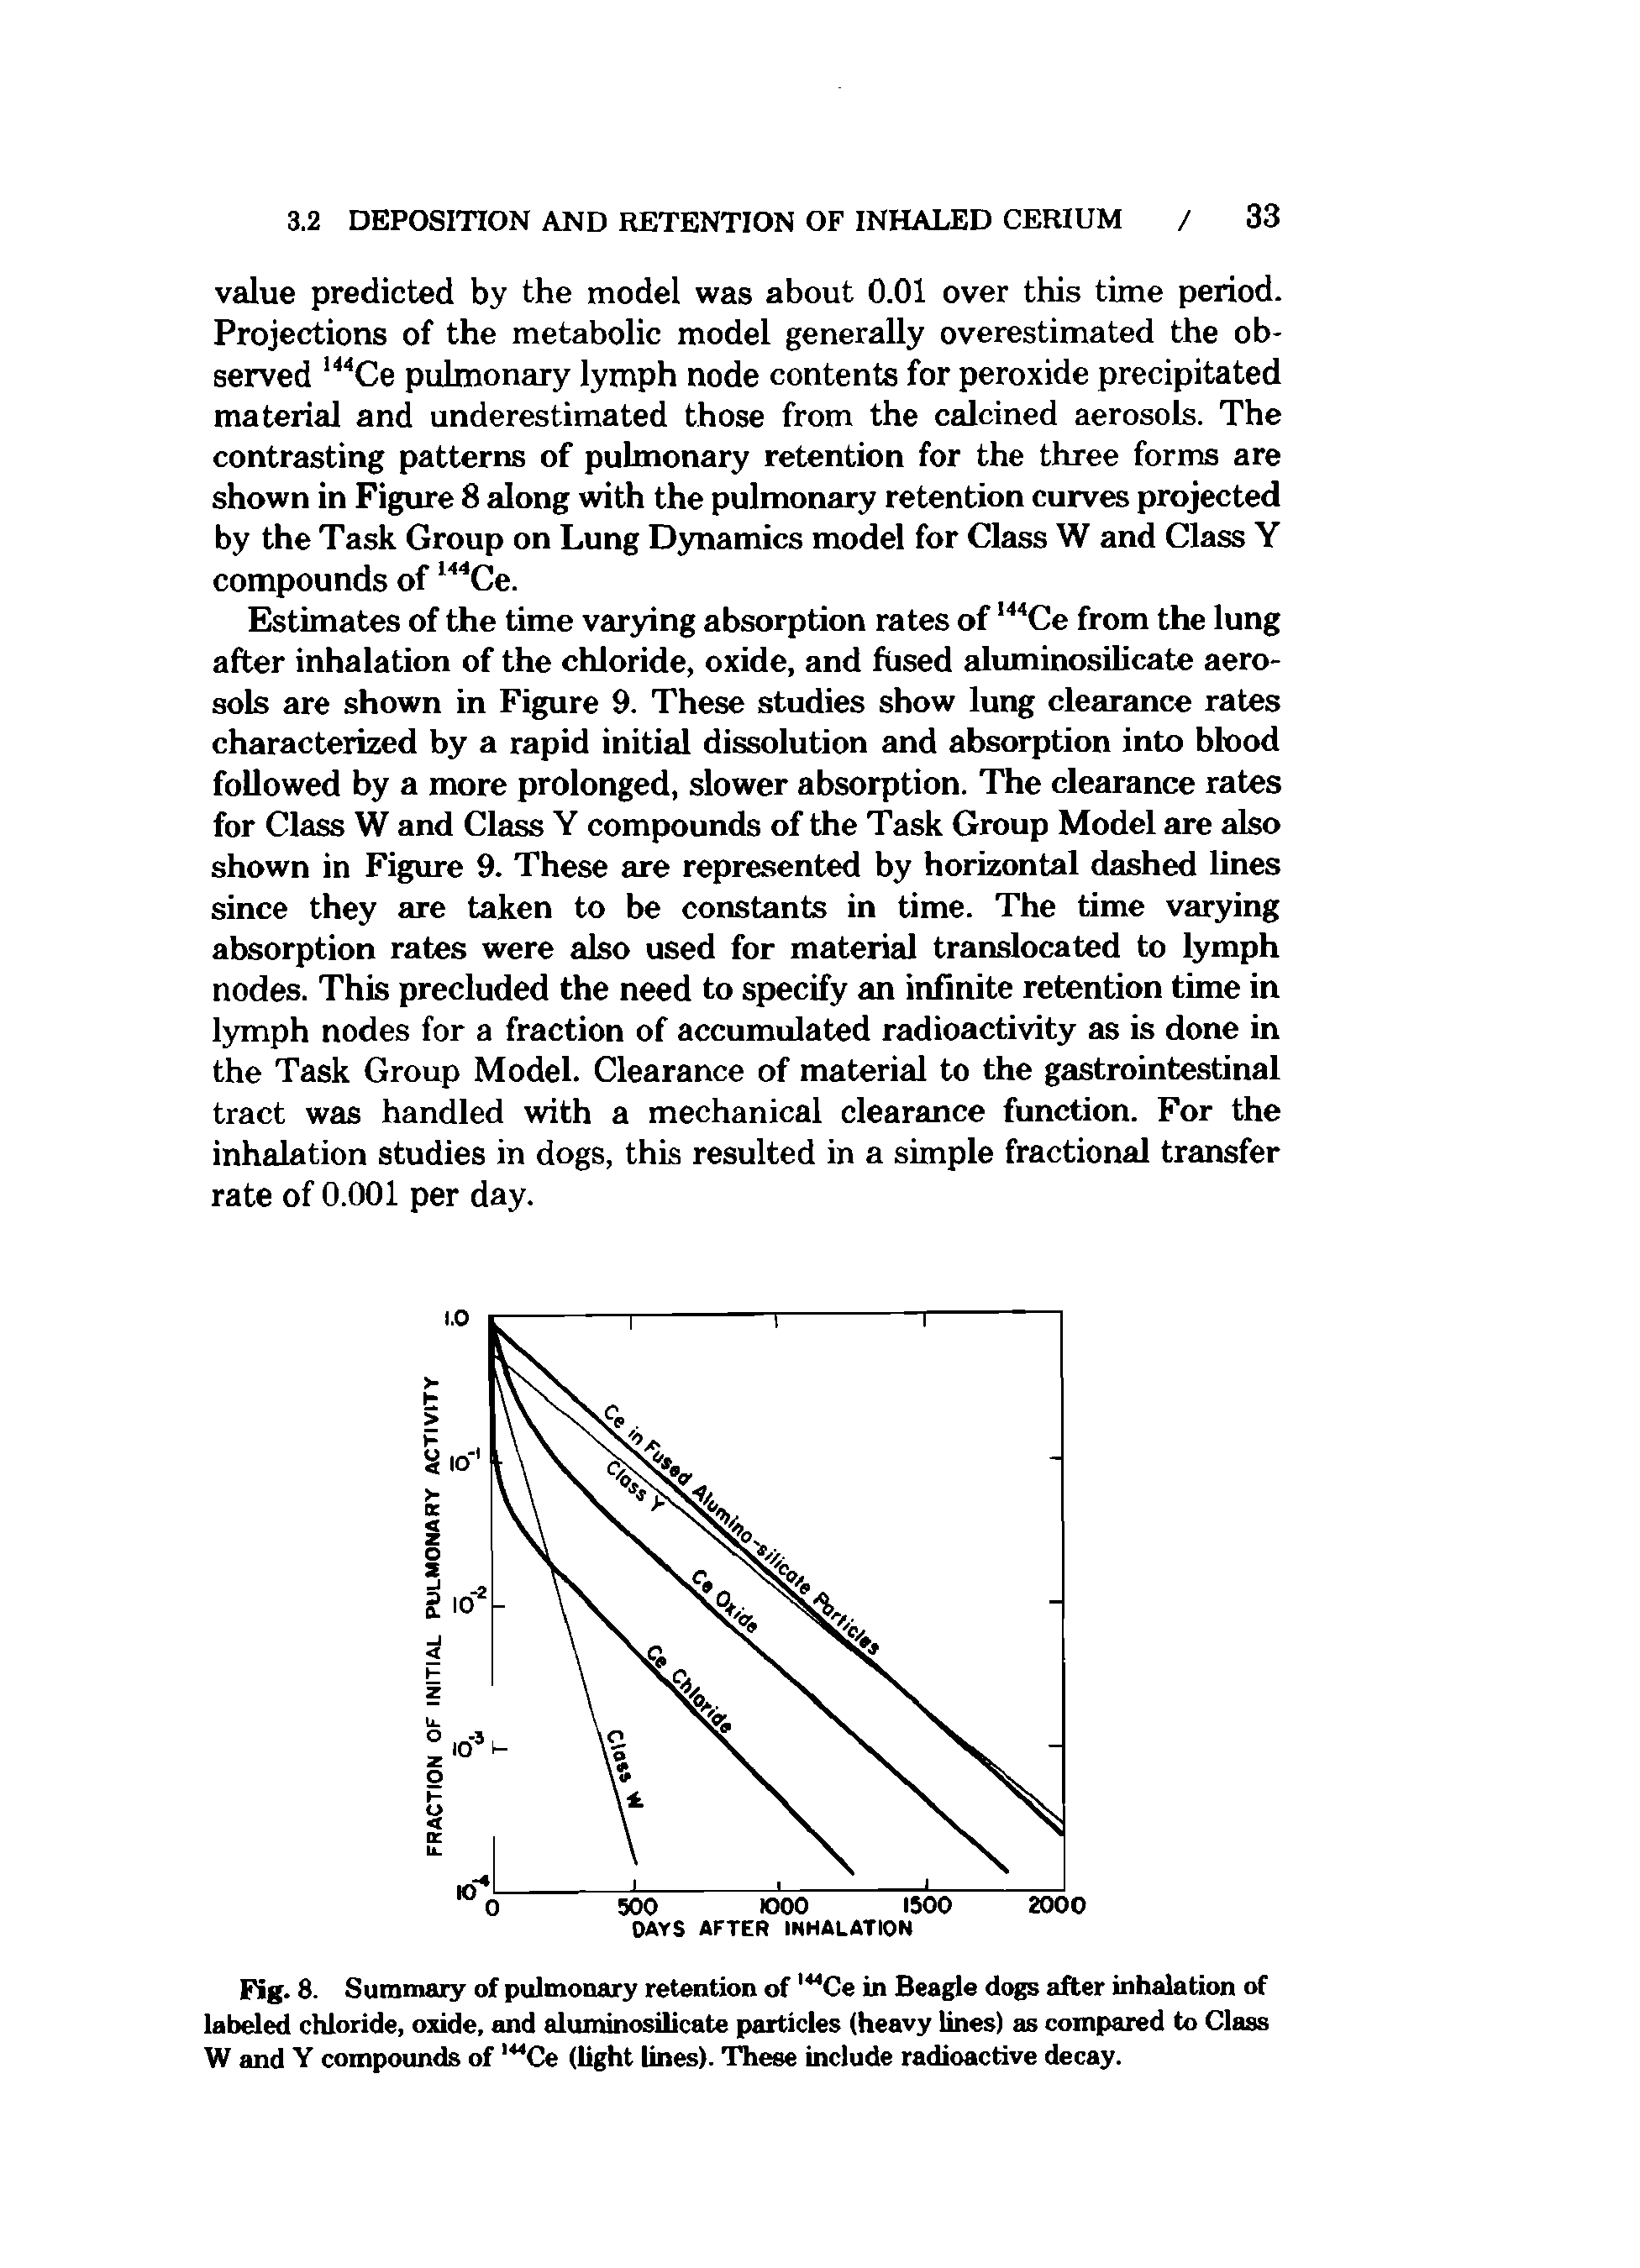 Fig. 8. Summary of pulmonary retention of l44Ce in Beagle dogs after inhalation of labeled chloride, oxide, and aluminosilicate particles (heavy lines) as compared to Class W and Y compounds of l44Ce (light lines). These include radioactive decay.